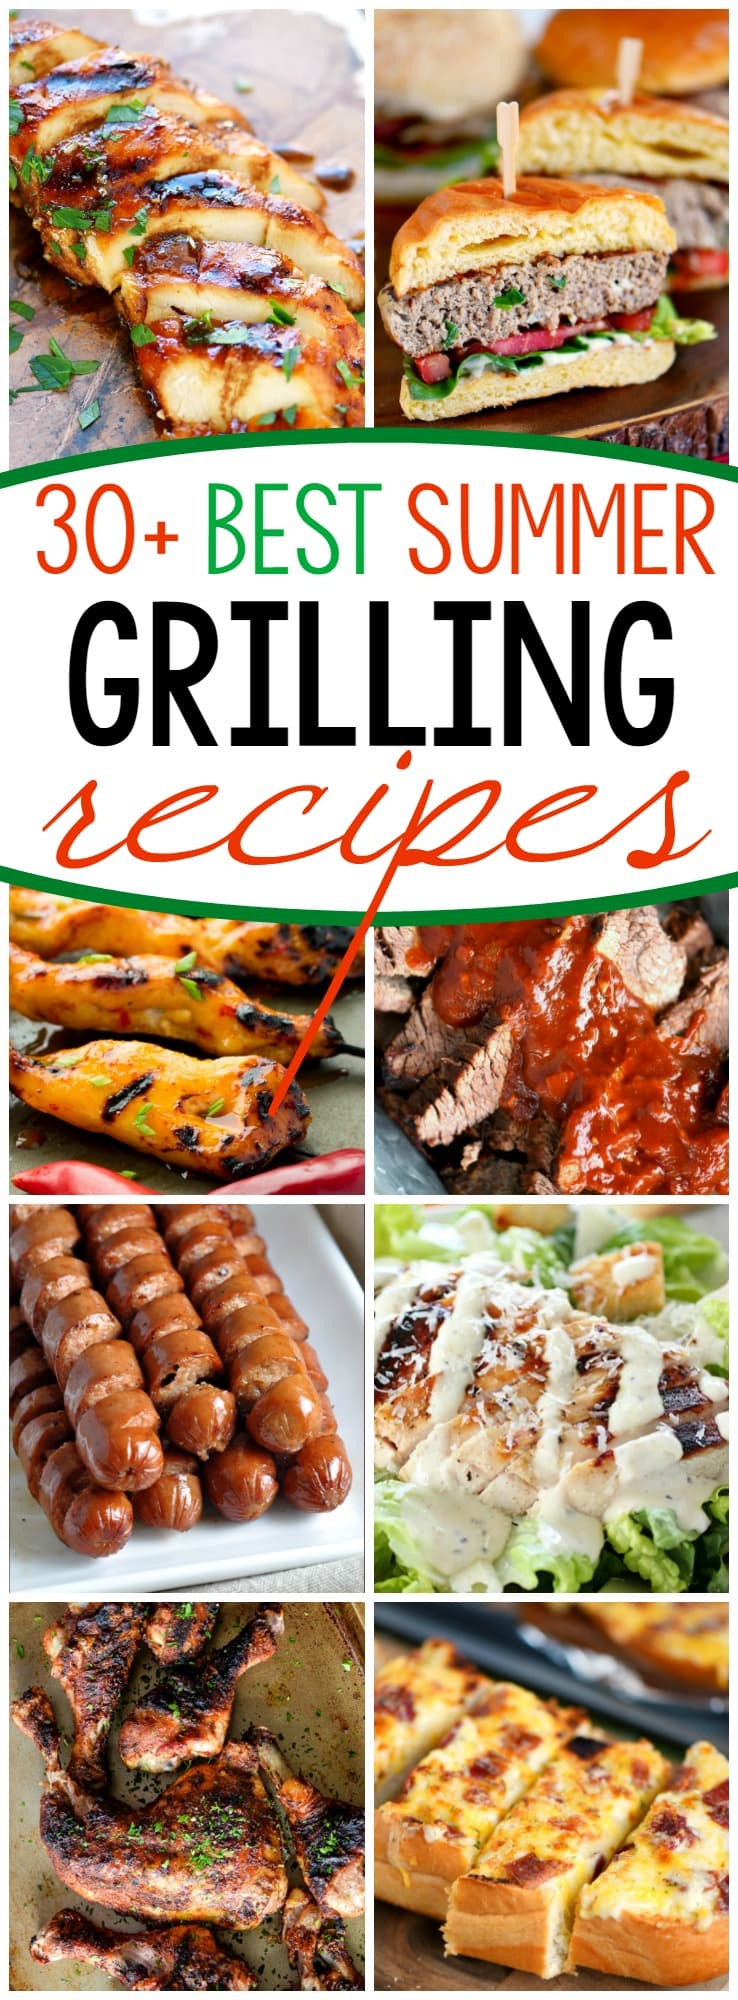 It's too hot to cook indoors! Fire up that grill and try one of these 31 Grilling Recipes for Summer! Your air conditioning bill will thank you.